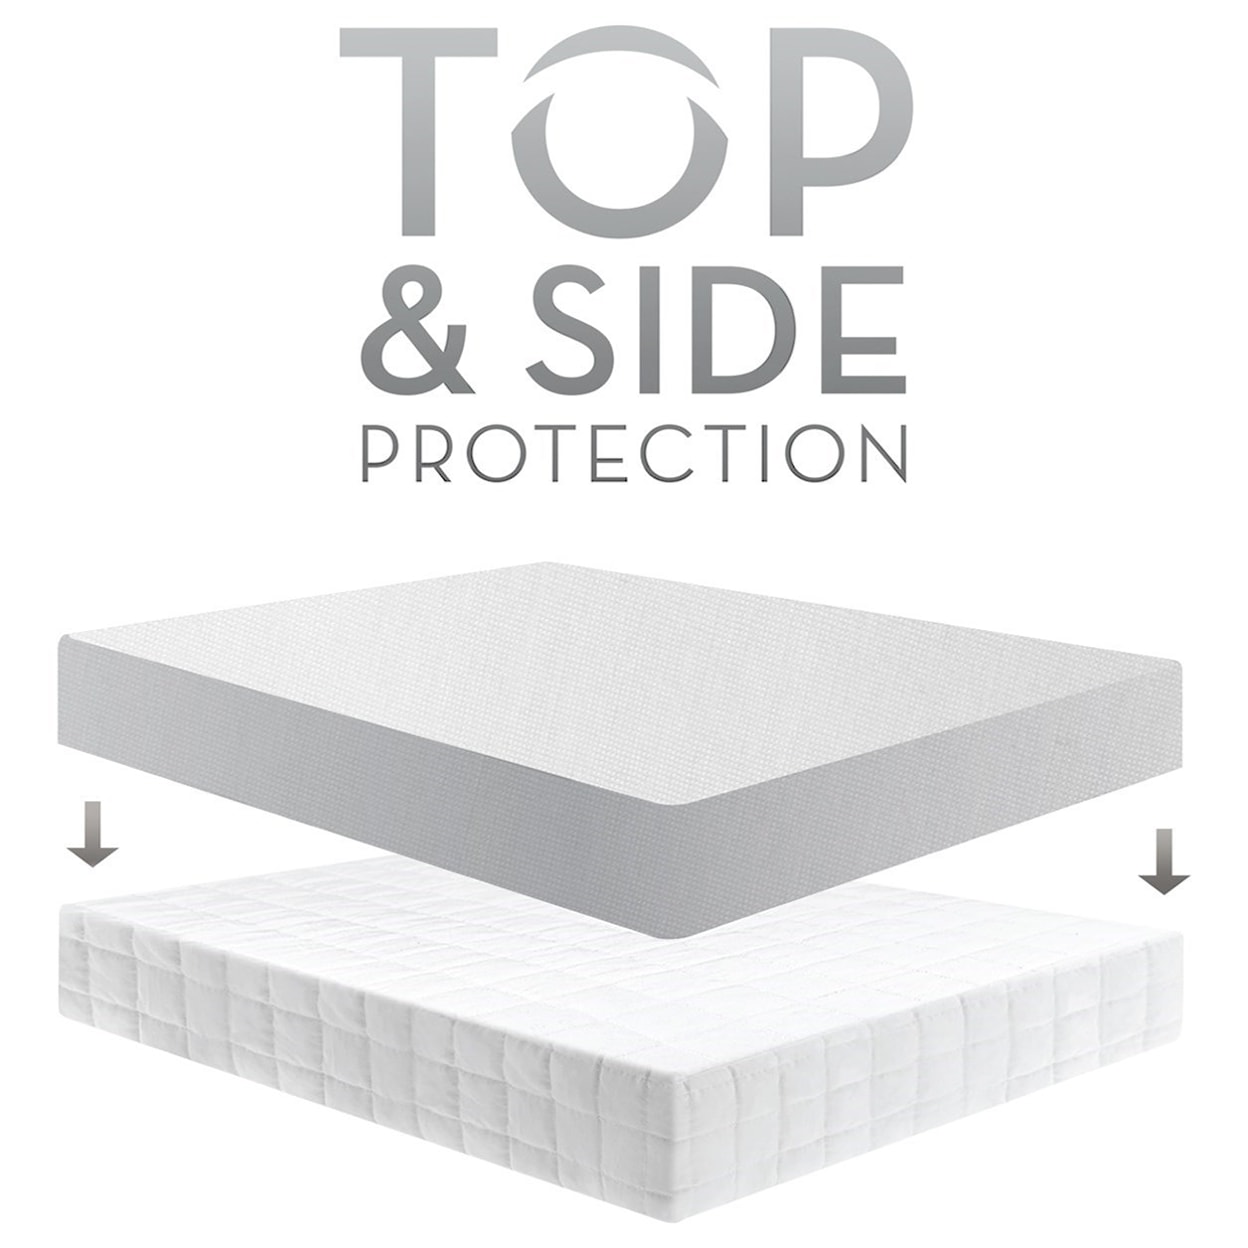 Malouf Five Sided Temp Control Full XL Five 5ided Mattress Protector